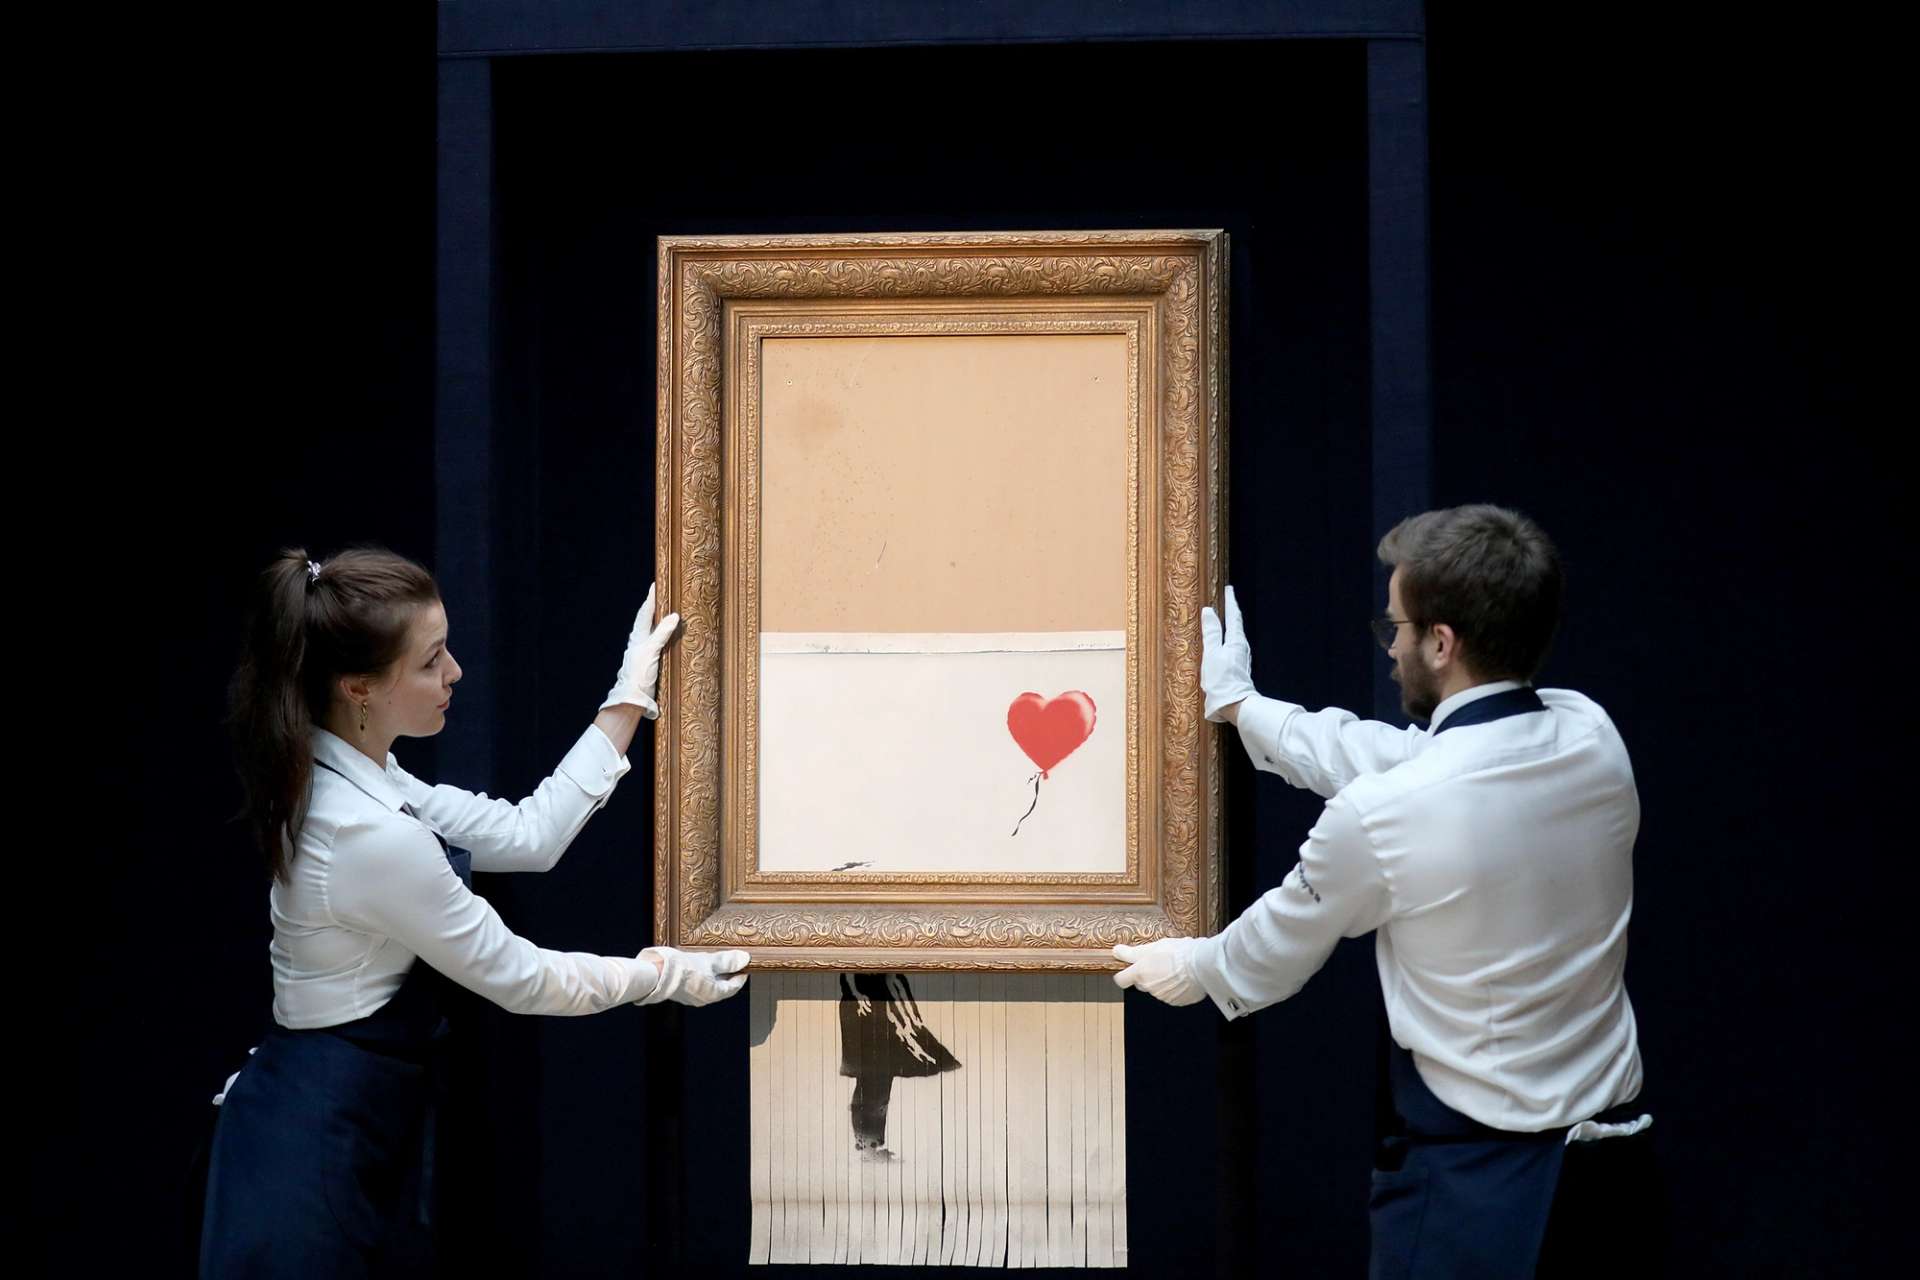 A photograph of two Sotheby's auction staff handling Banksy's shredded Girl With Balloon artwork, which suspends below the gilt frame in shreds.